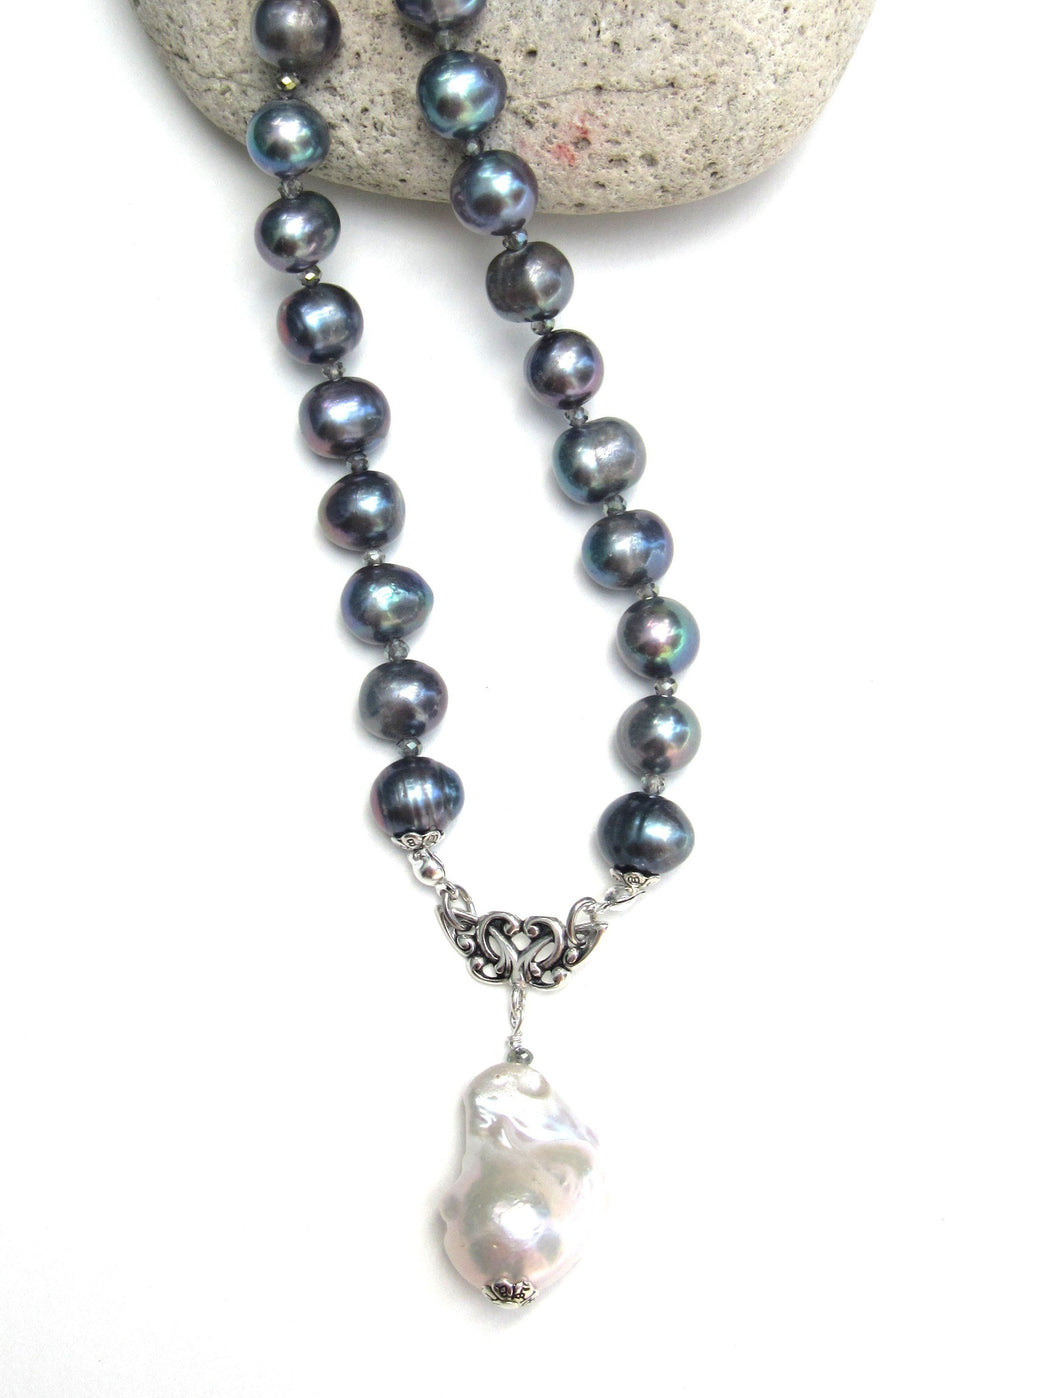 Ovation Pearl Necklace - Grey